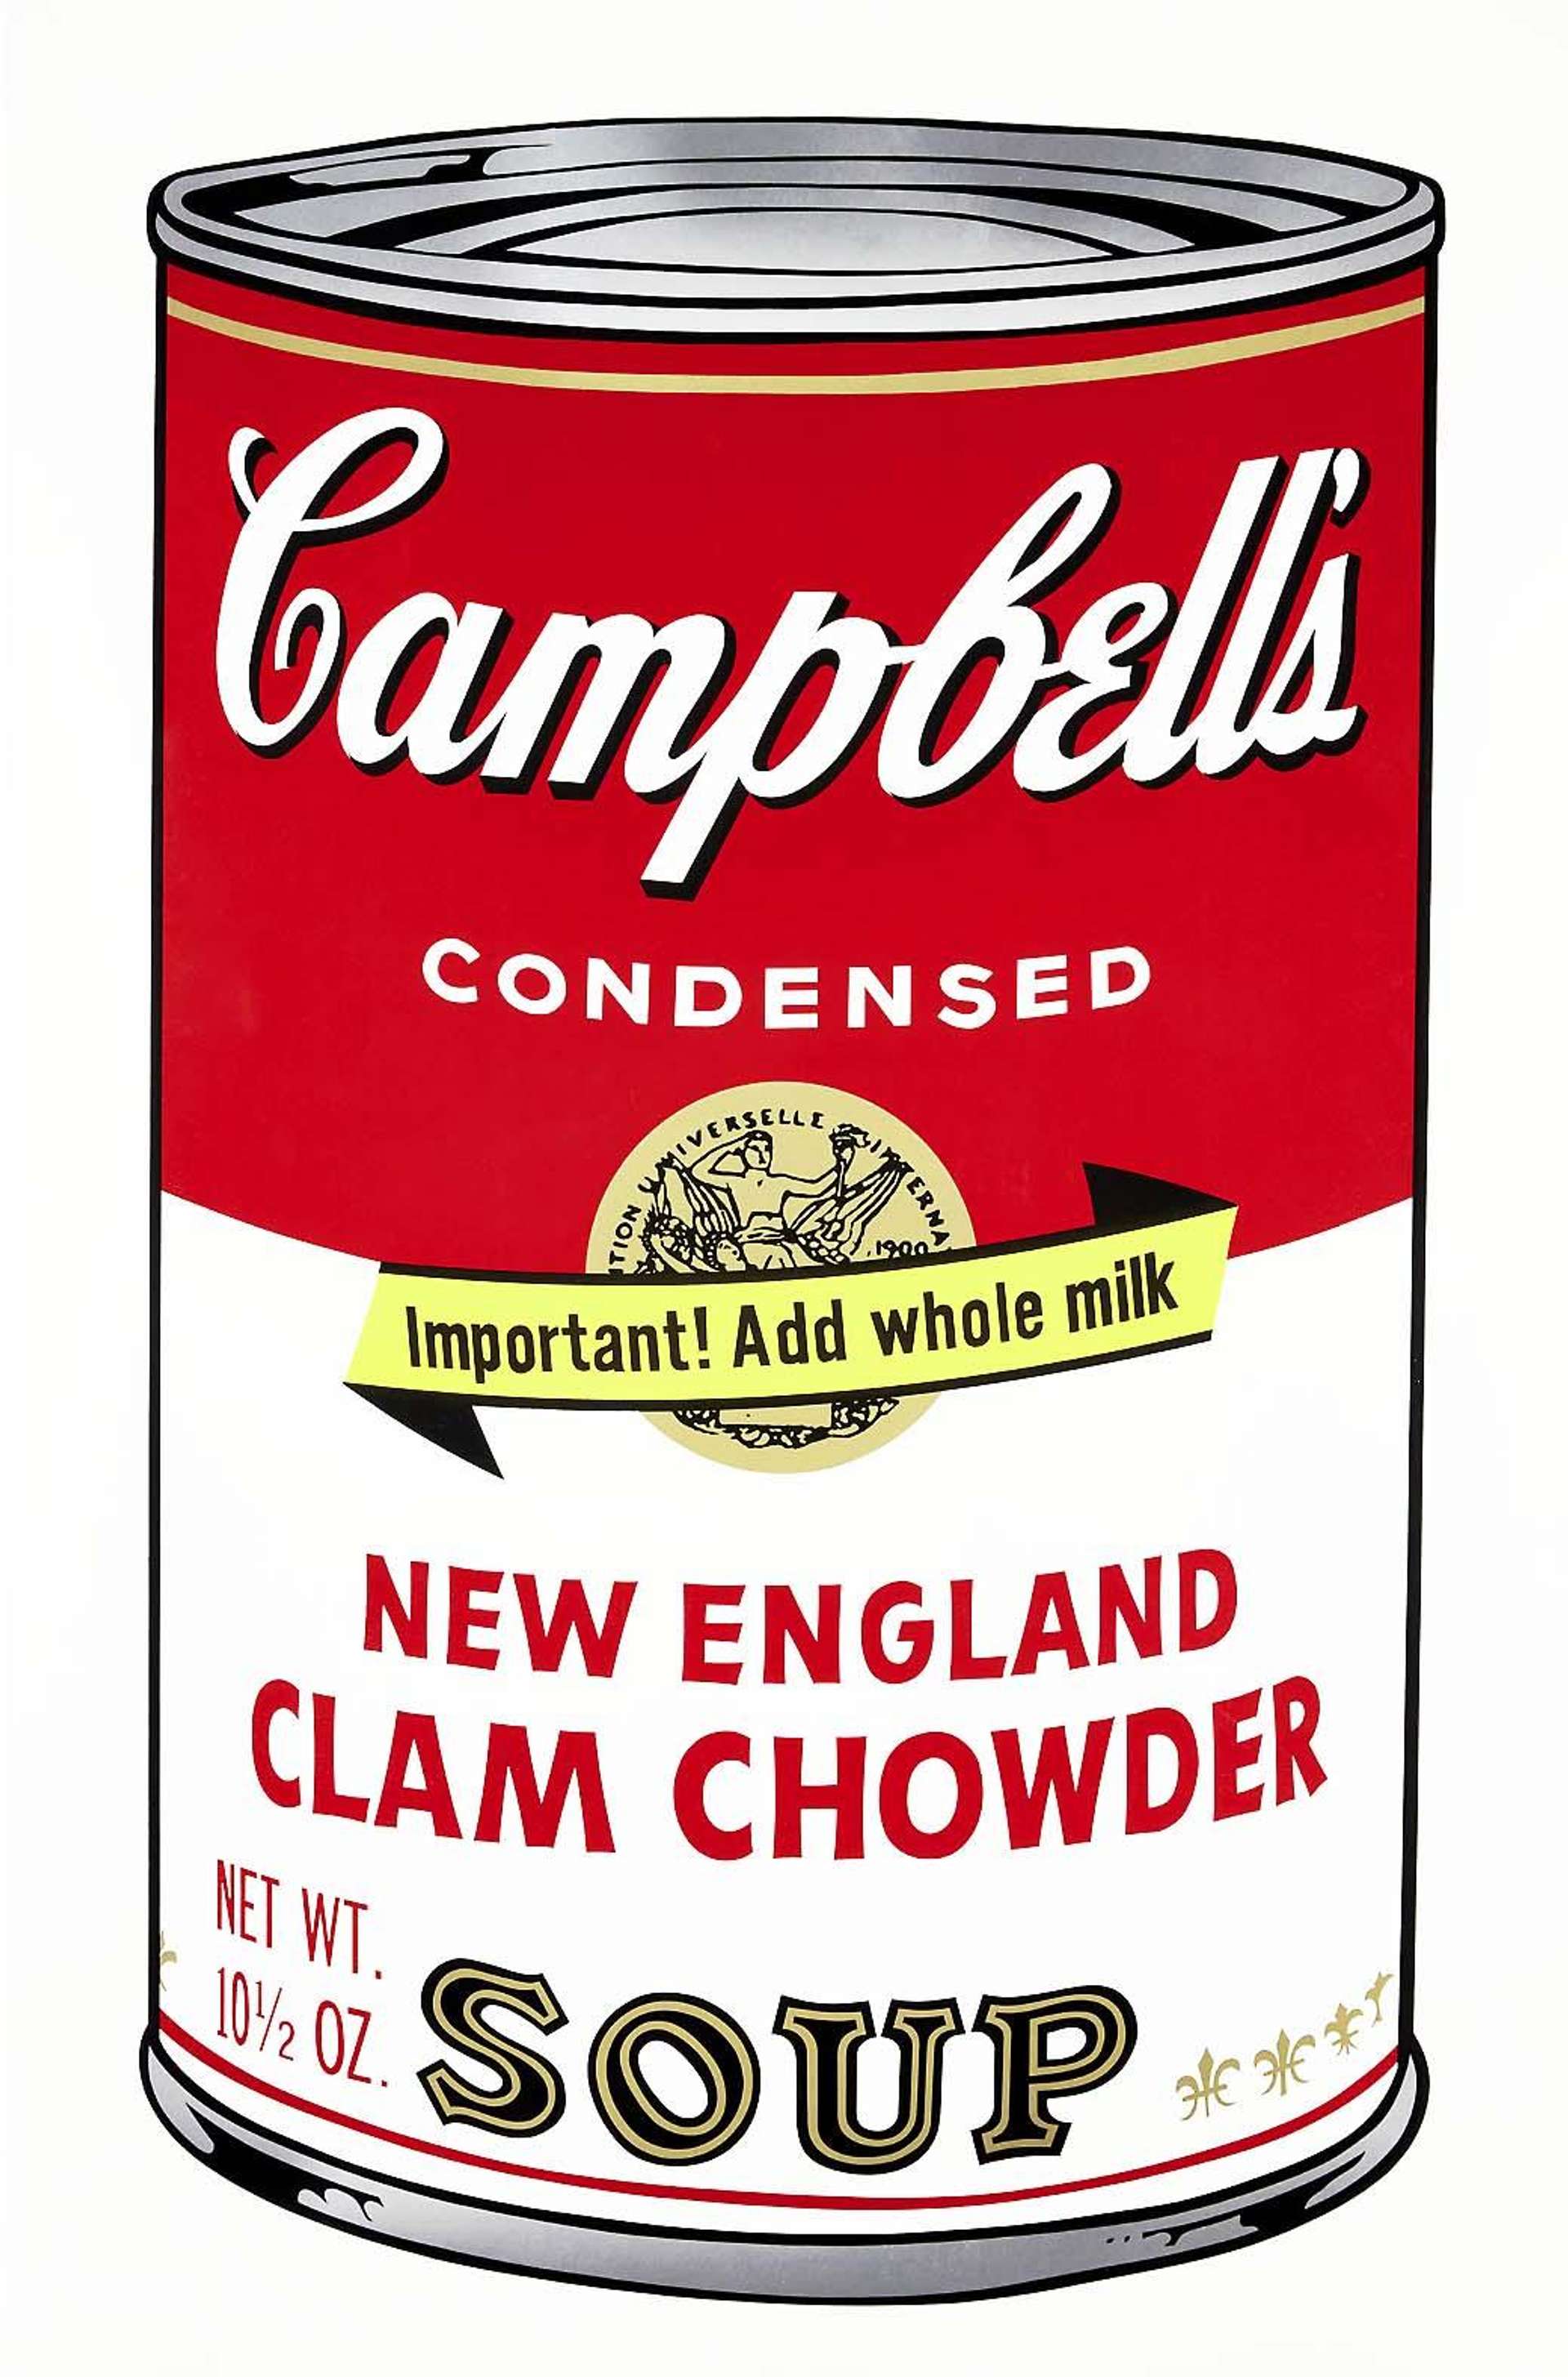 Campbell's Soup II, New England Clam Chowder (F. & S. II.57) - Signed Print by Andy Warhol 1969 - MyArtBroker